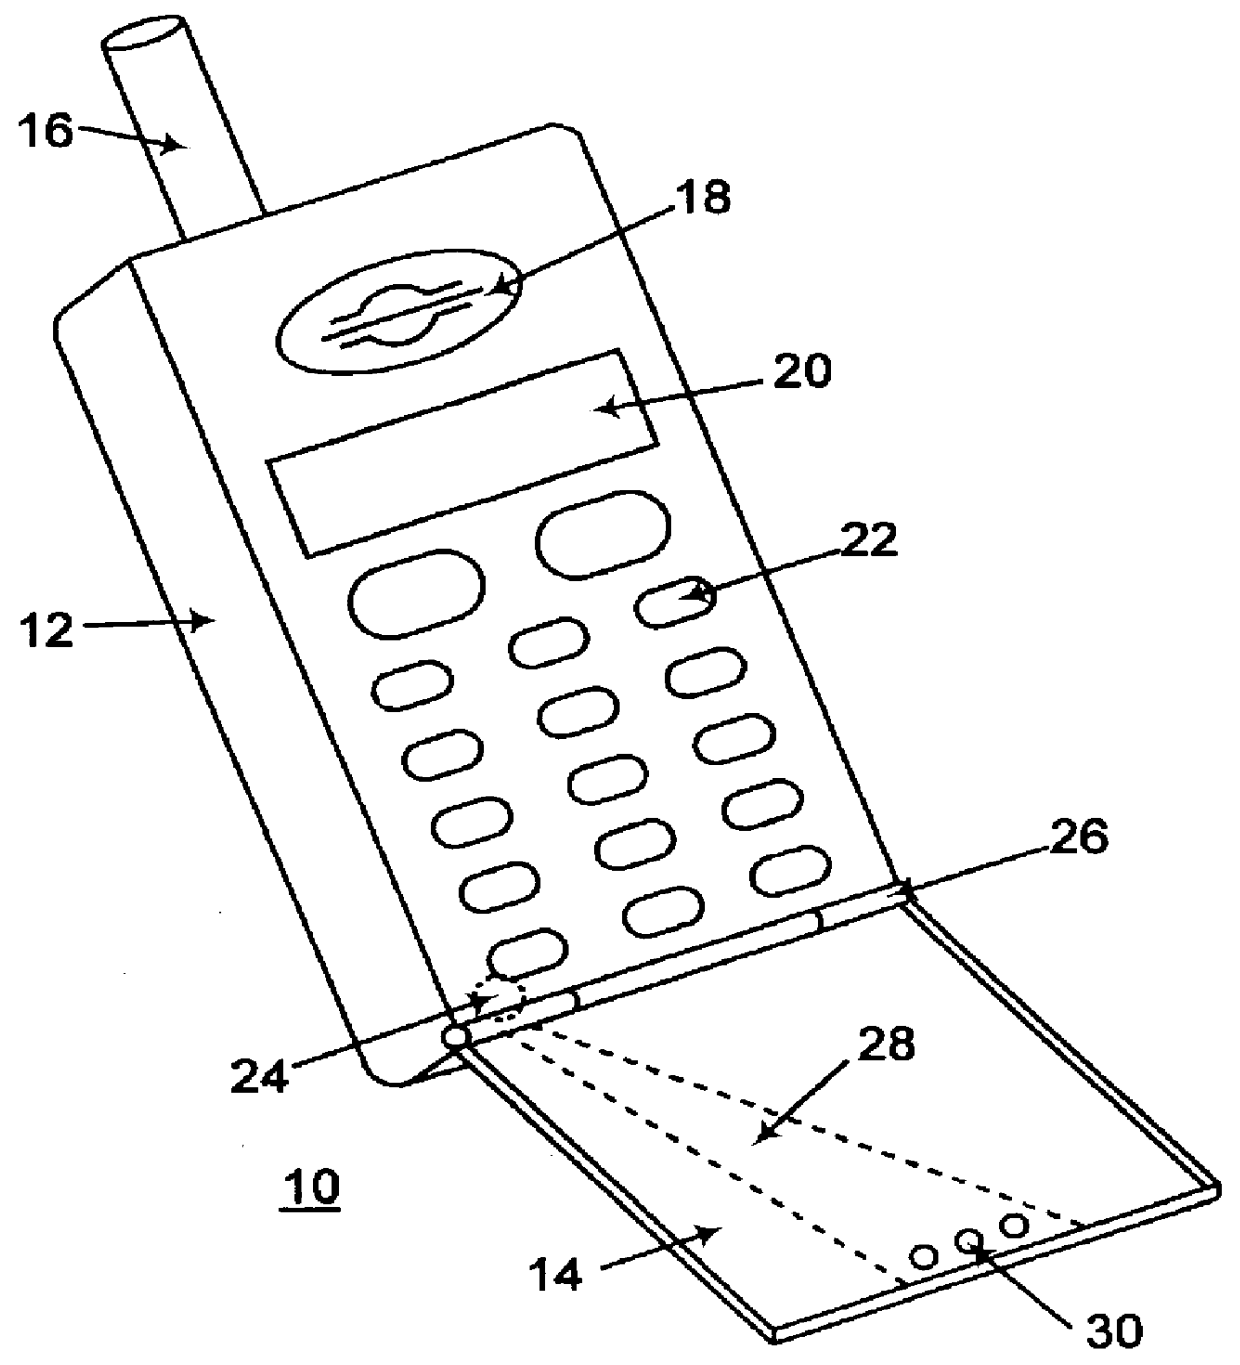 Portable speech communication apparatus with sound channel in swingable flip